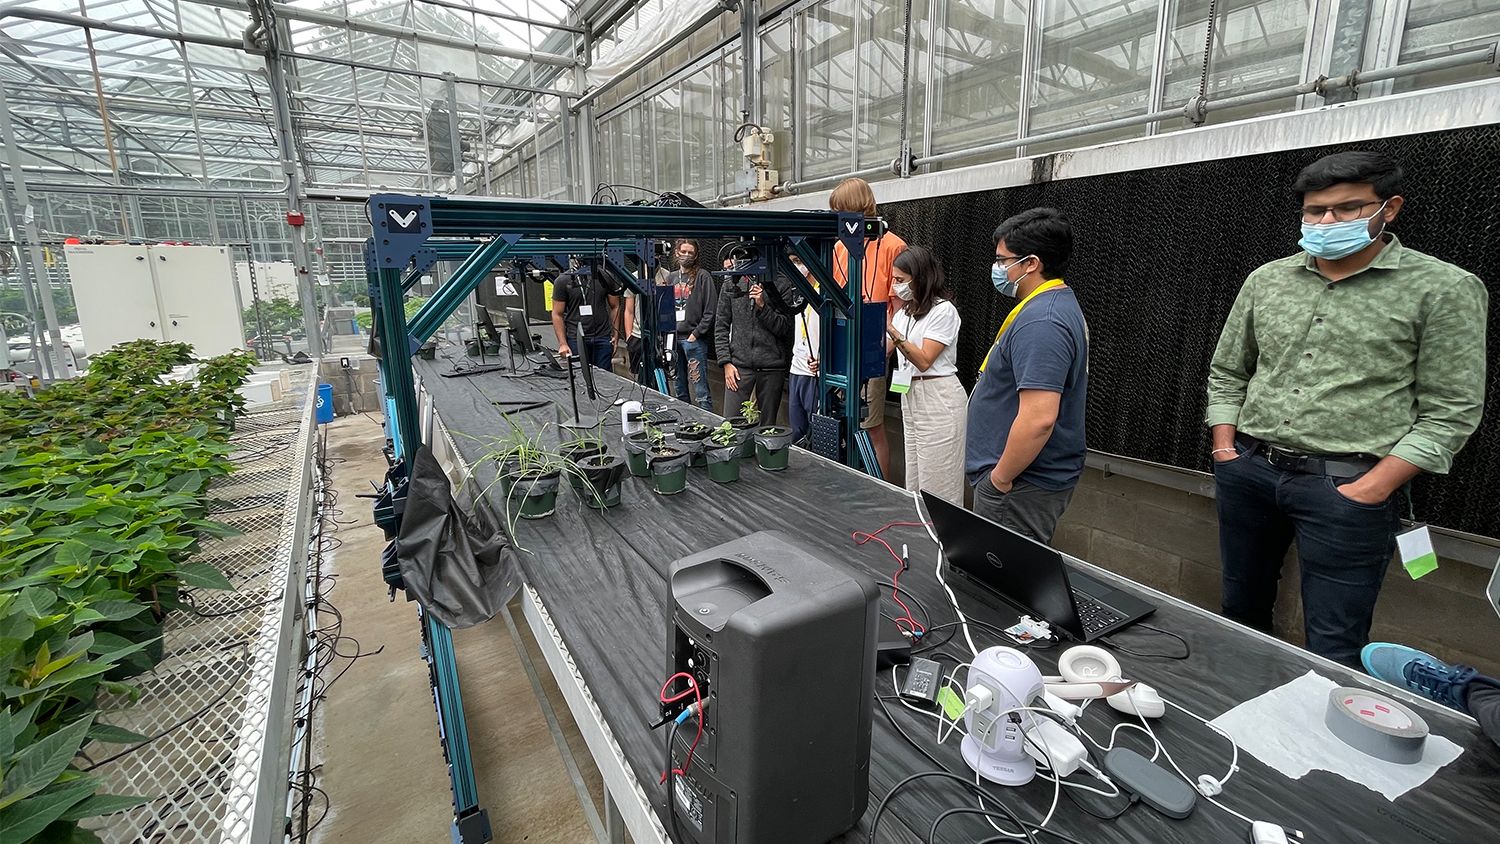 A group of students observe the BenchBot in a greenhouse